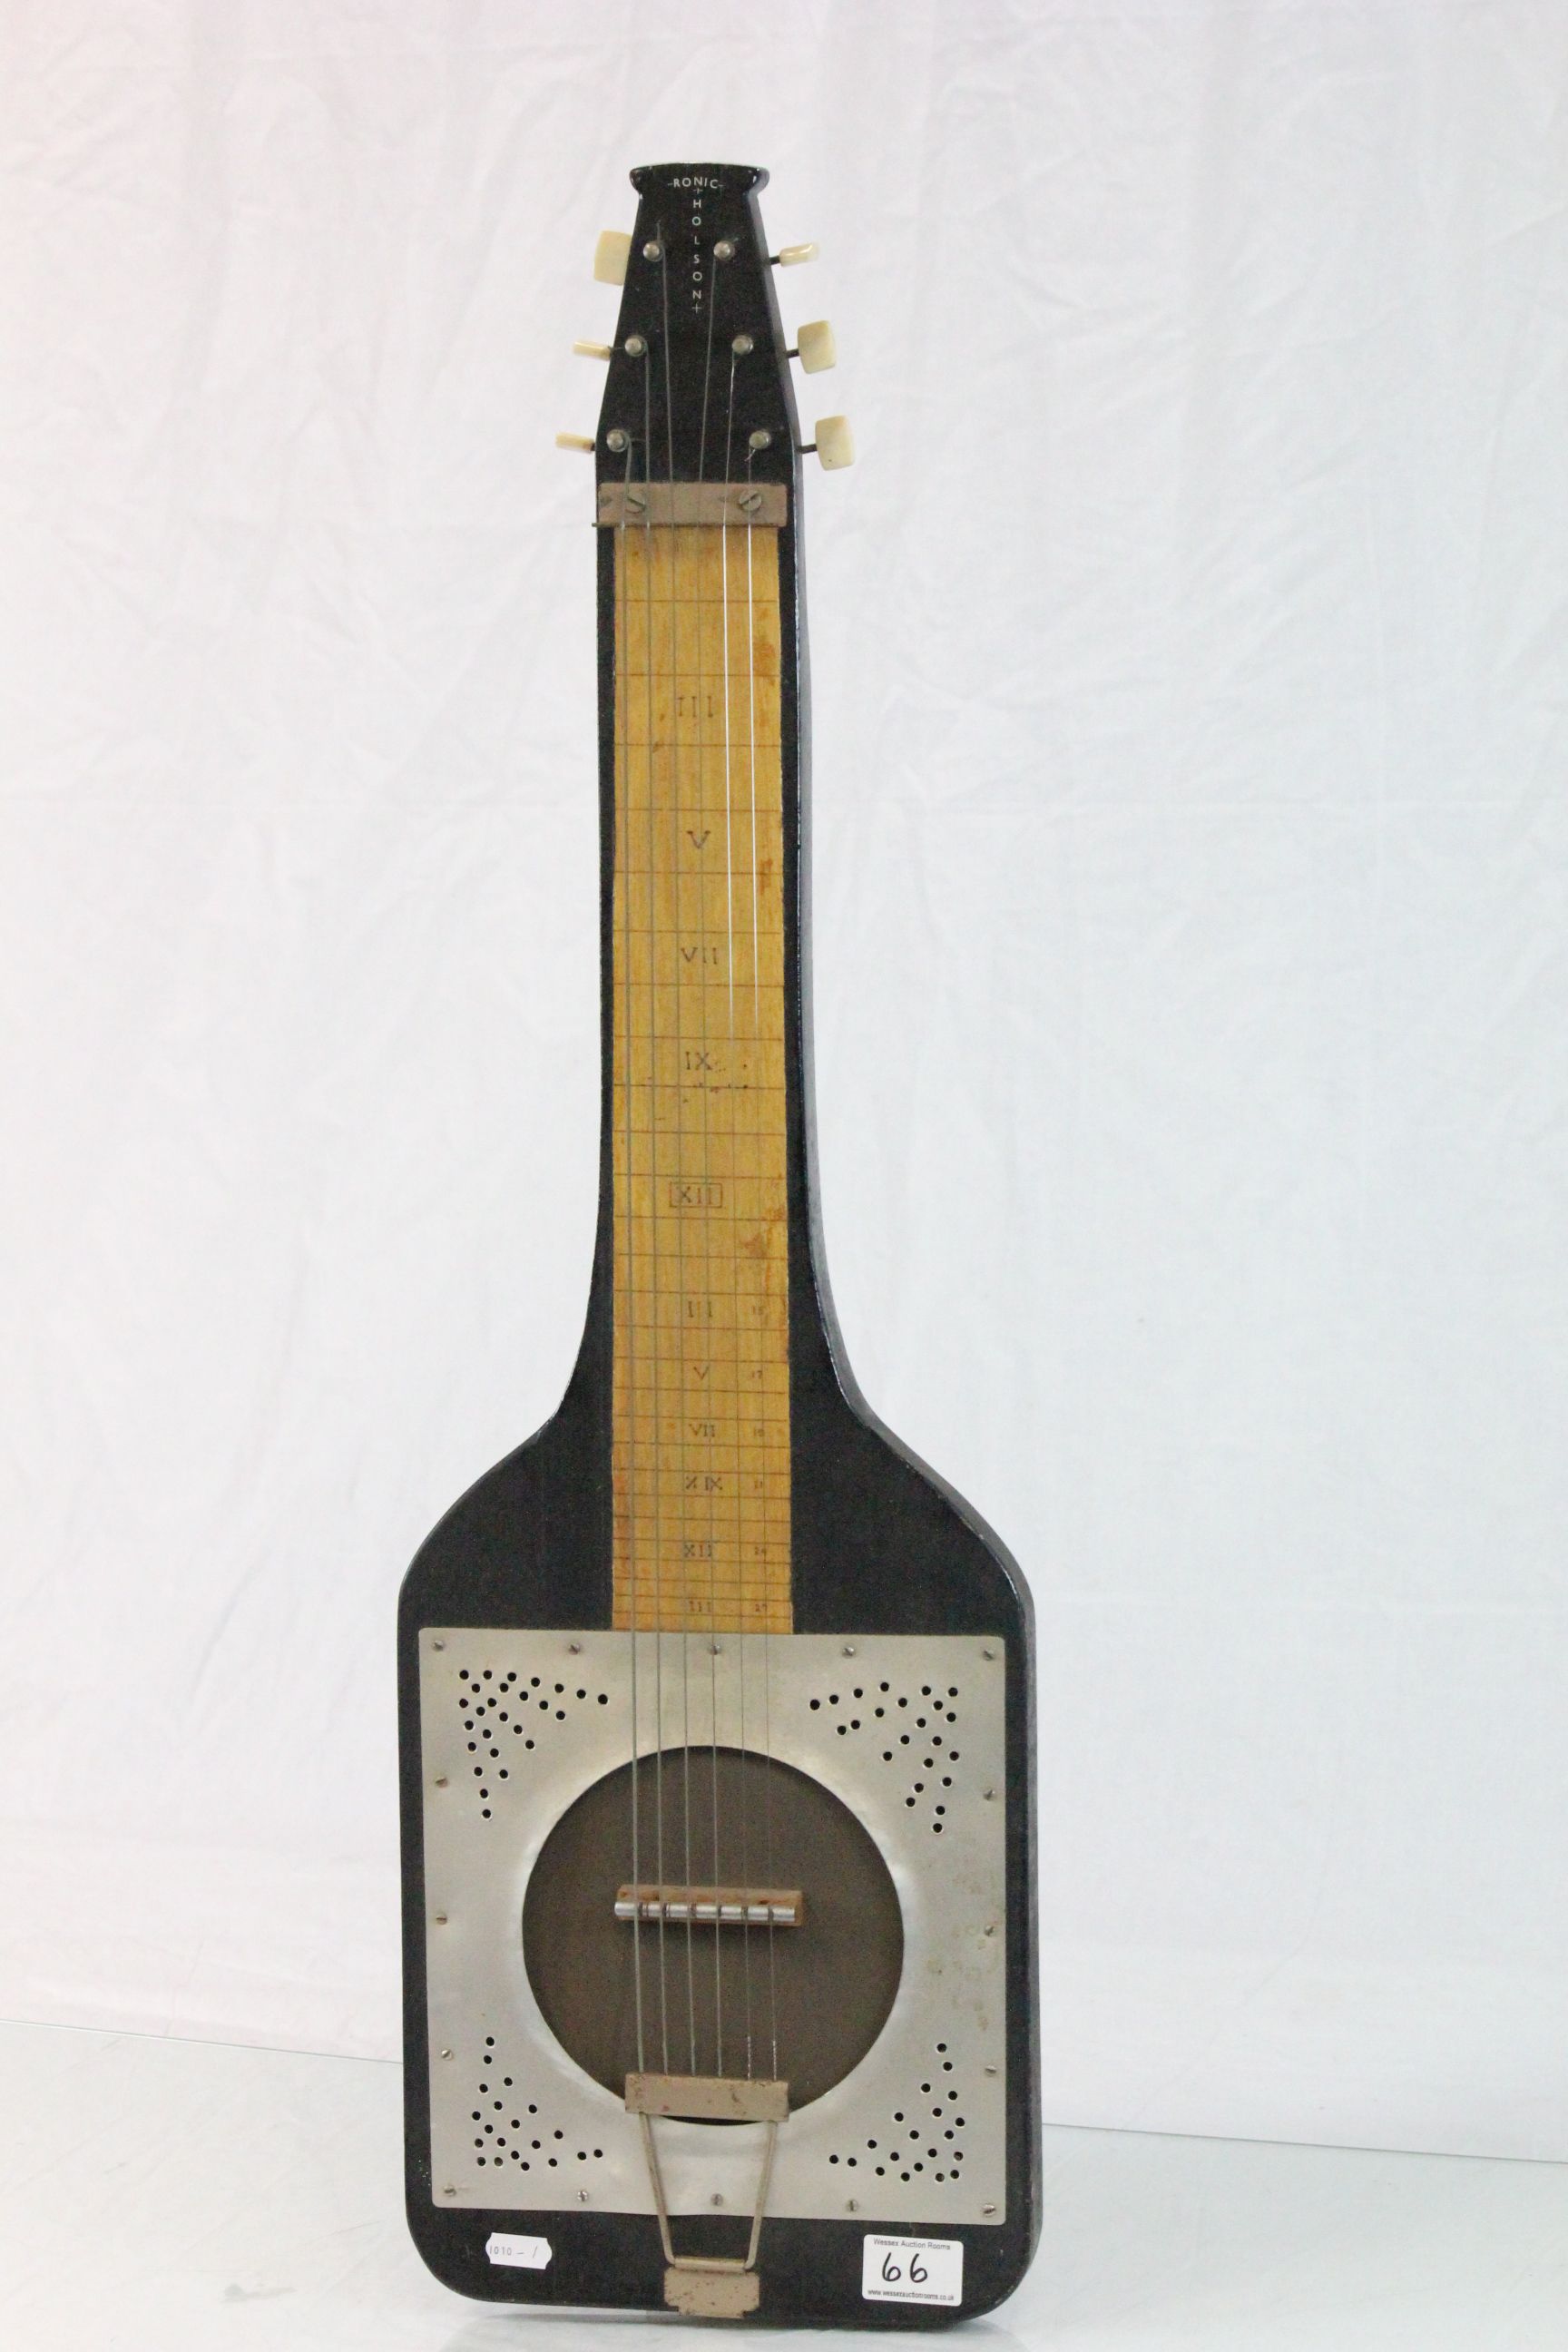 Old lap steel guitar by Ronic Holson in soft bag